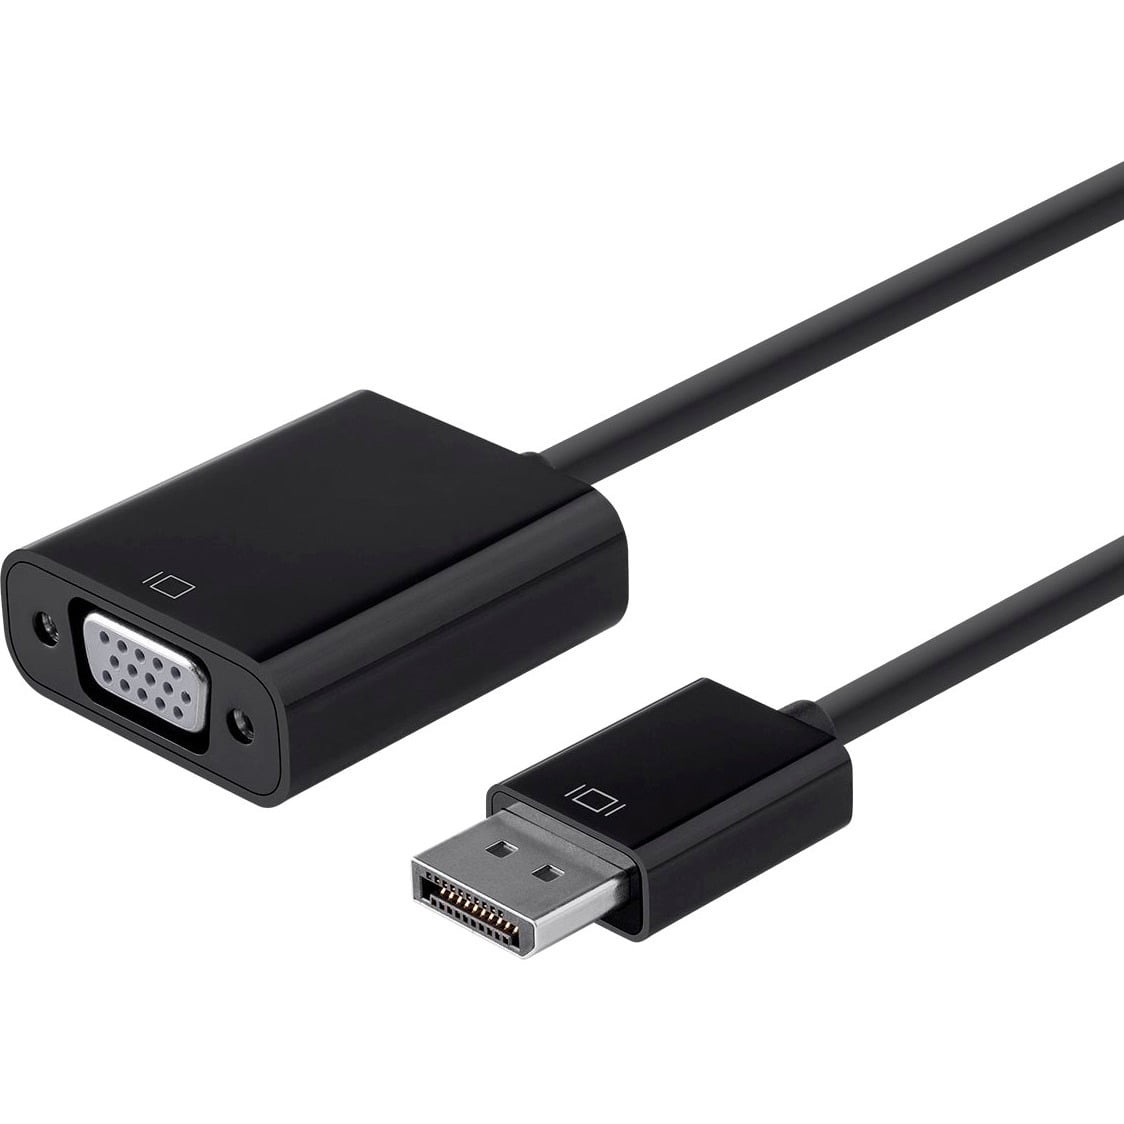 Mini Displayport Thunderbolt To HDMI Adapter 6ft Cable for Blackmagic Design New 